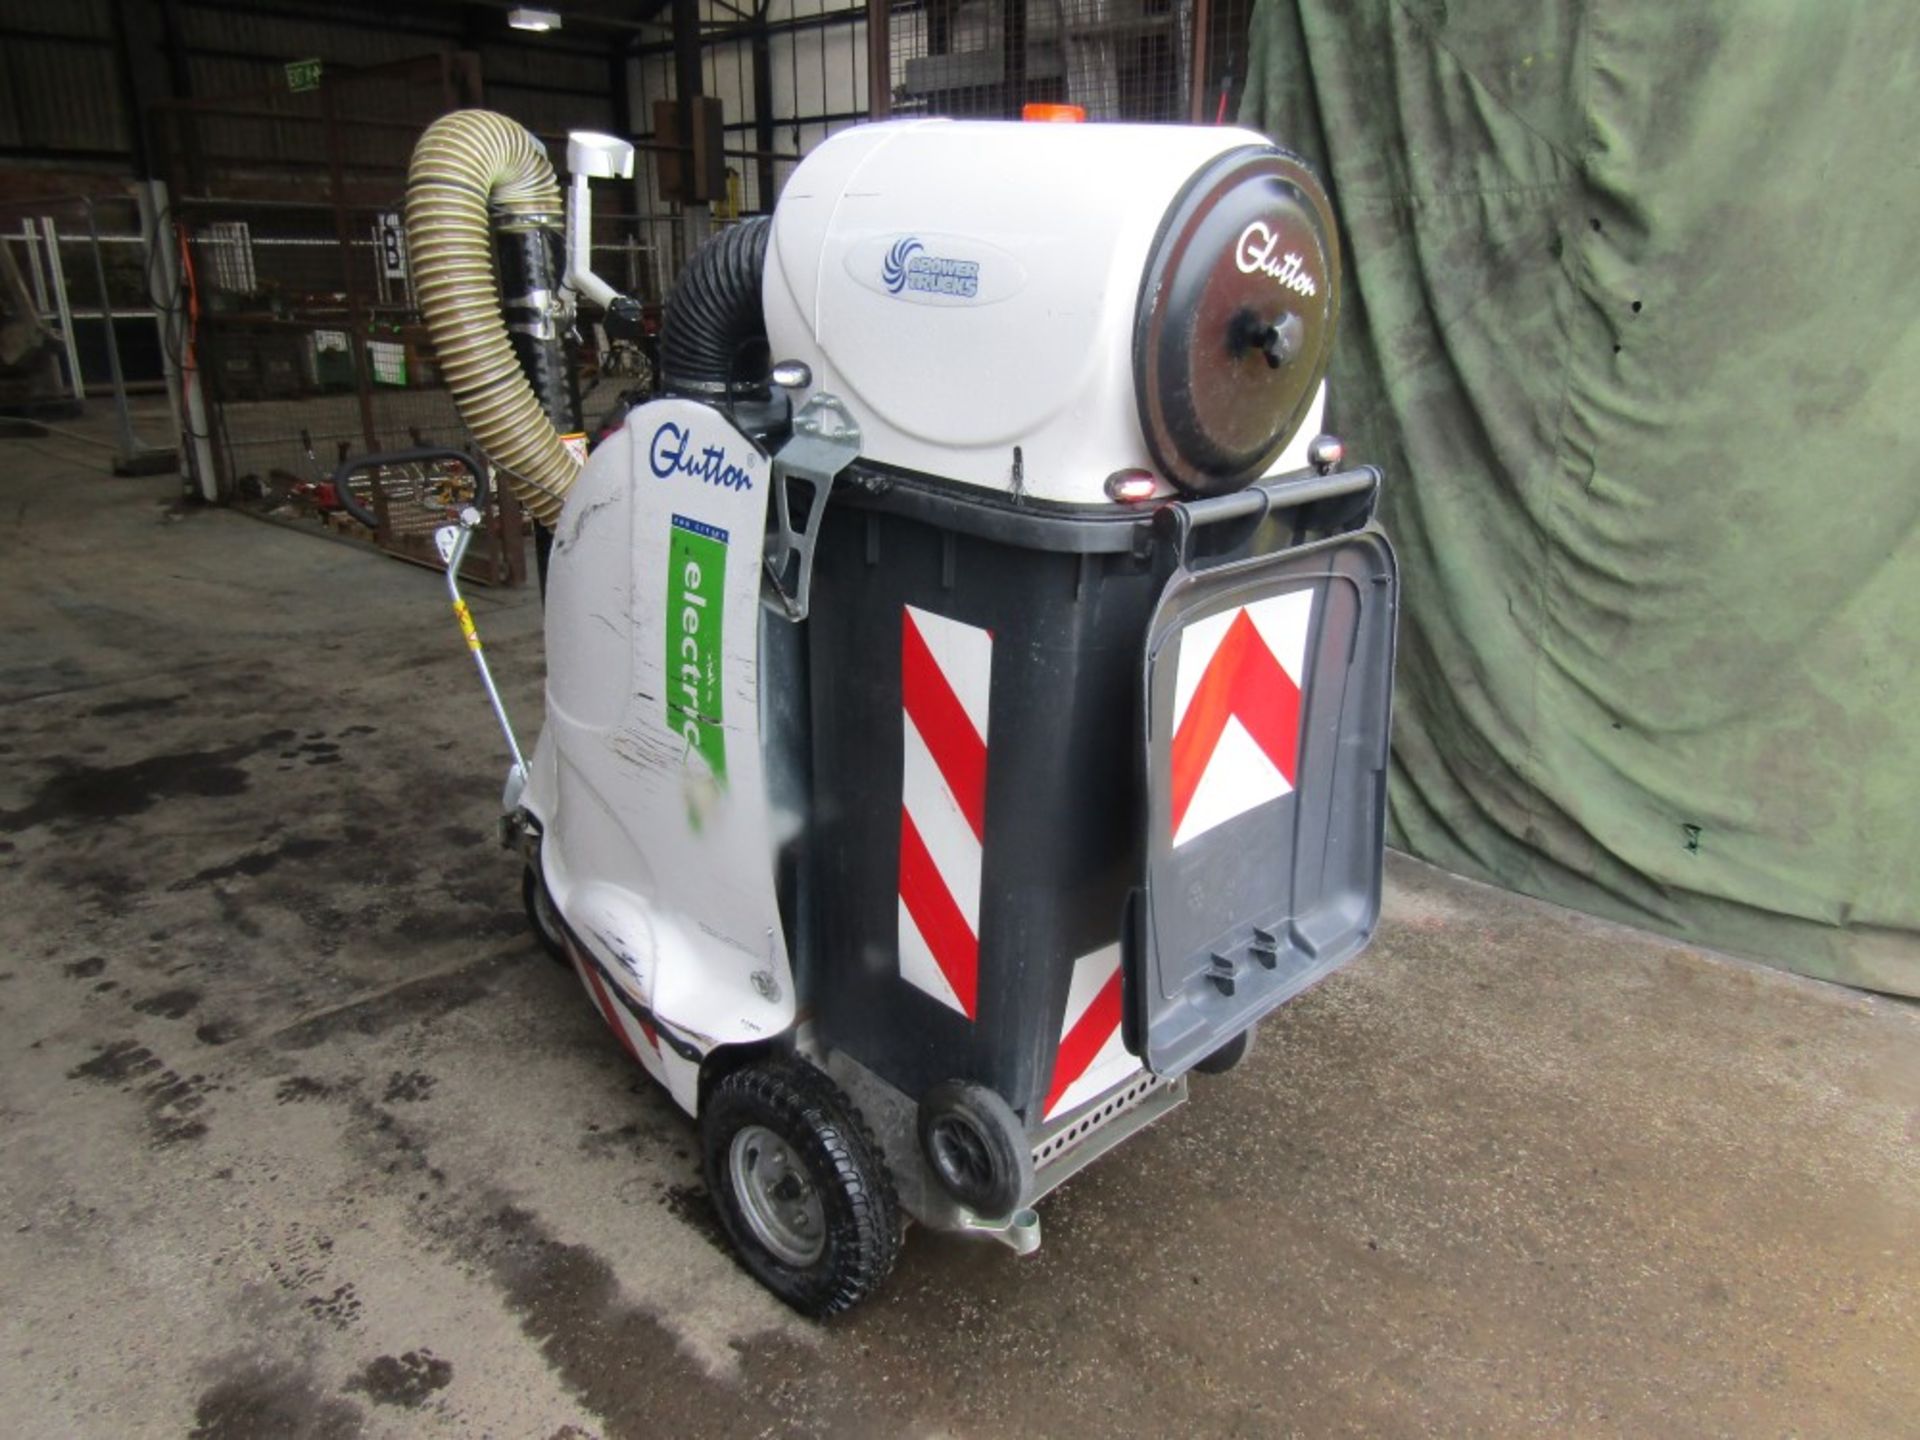 GLUTTON 2411 ELECTRIC WASTE VACUUM CLEANER (DIRECT COUNCIL) 1128 HOURS [+ VAT] - Image 2 of 3